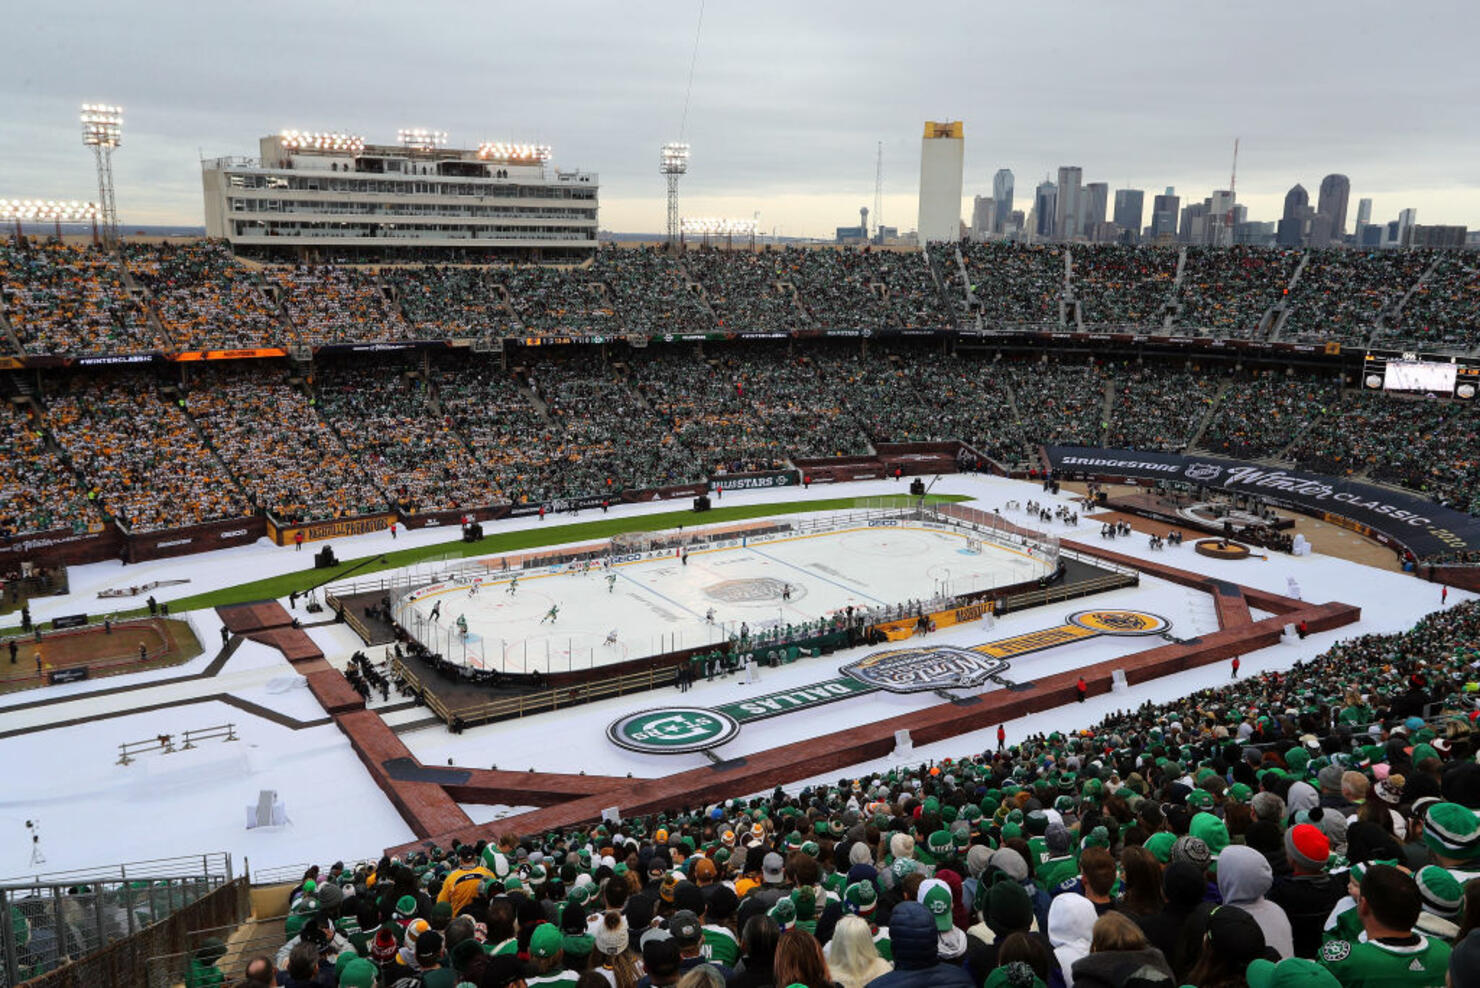 What do you think? Wild unveils Minneapolis-St. Paul jersey for Winter  Classic